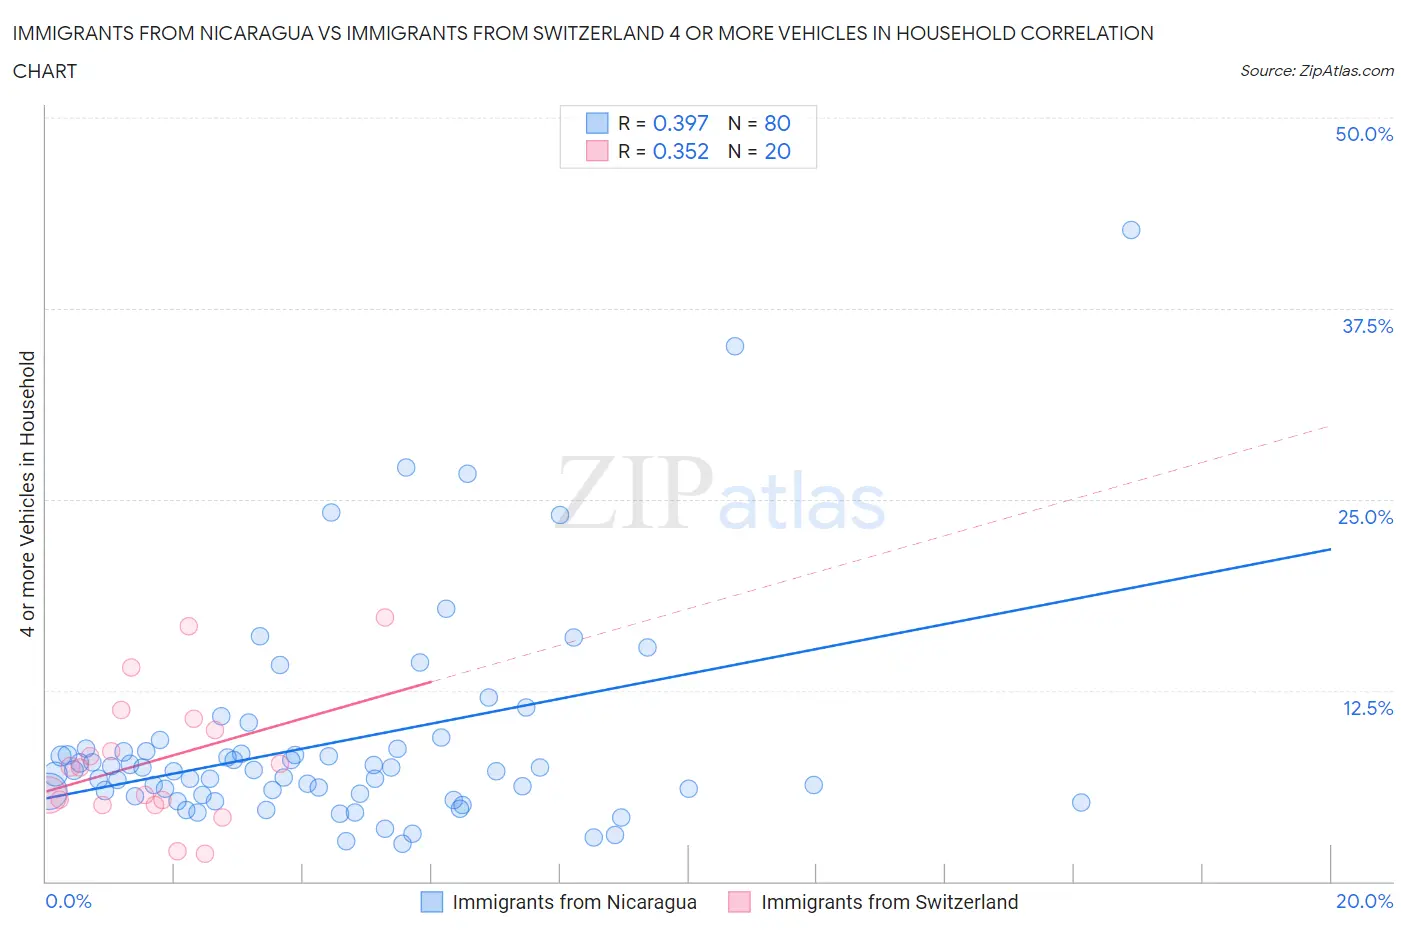 Immigrants from Nicaragua vs Immigrants from Switzerland 4 or more Vehicles in Household